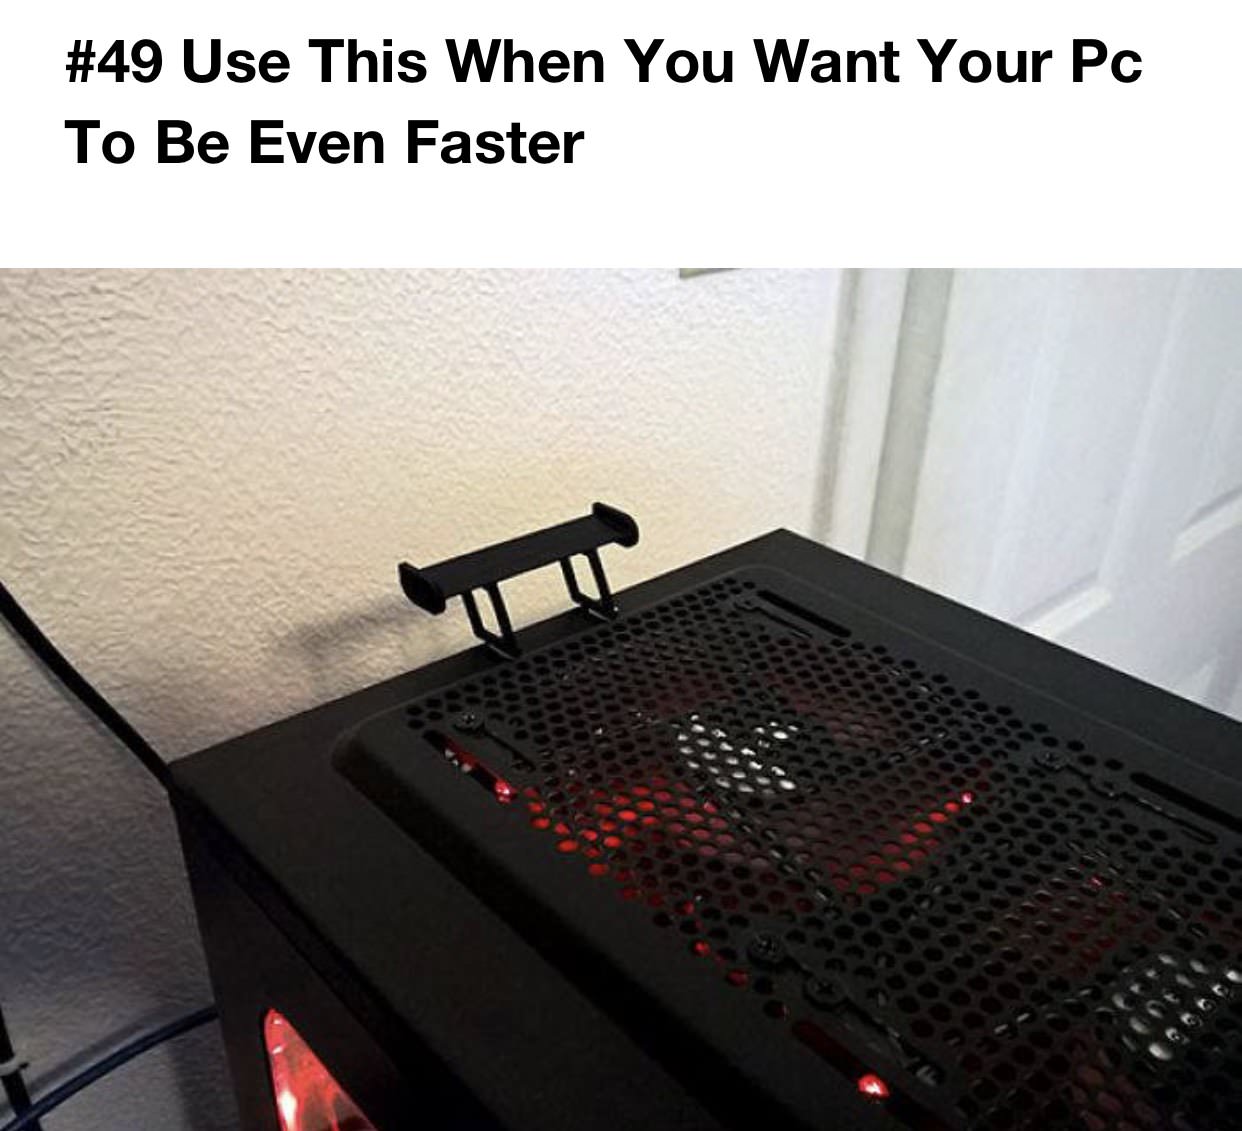 slow pc memes - Use This When You Want Your Pc To Be Even Faster Si